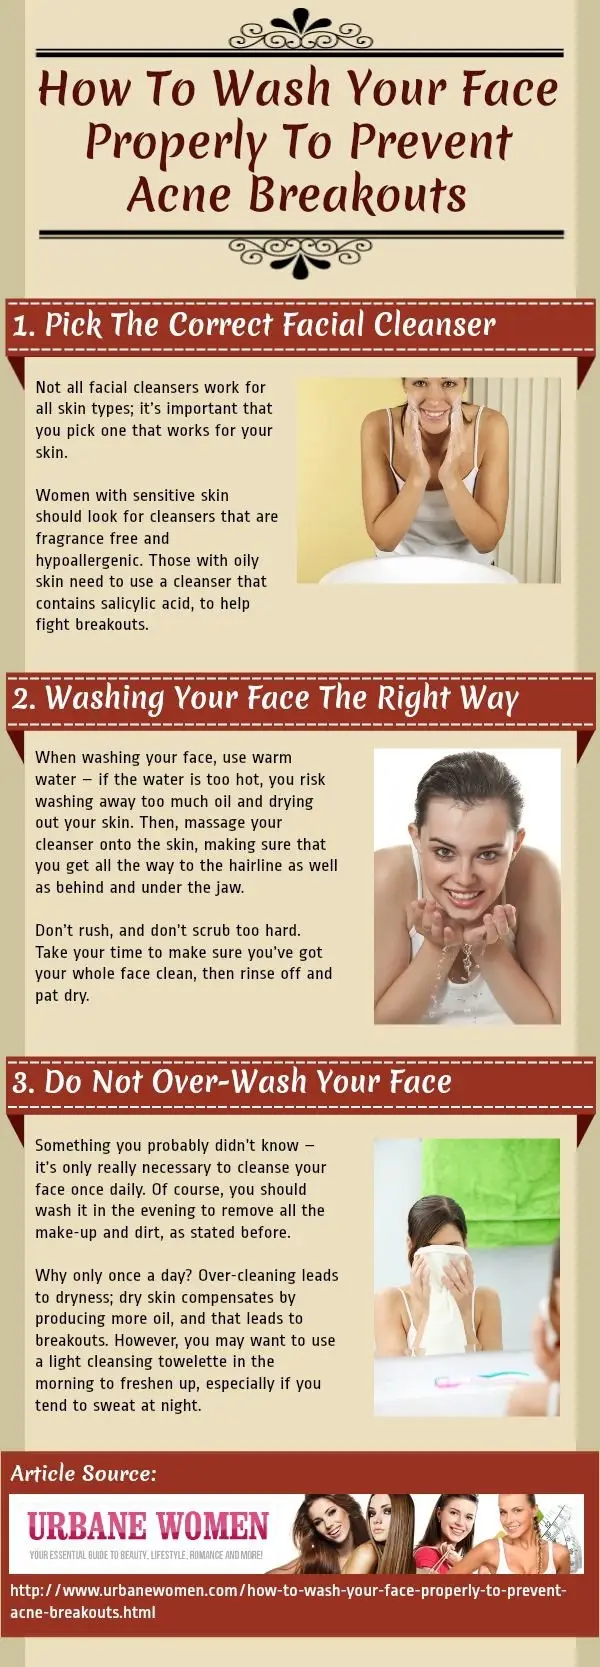 How to Wash Your Face Properly to Prevent Acne Breakouts